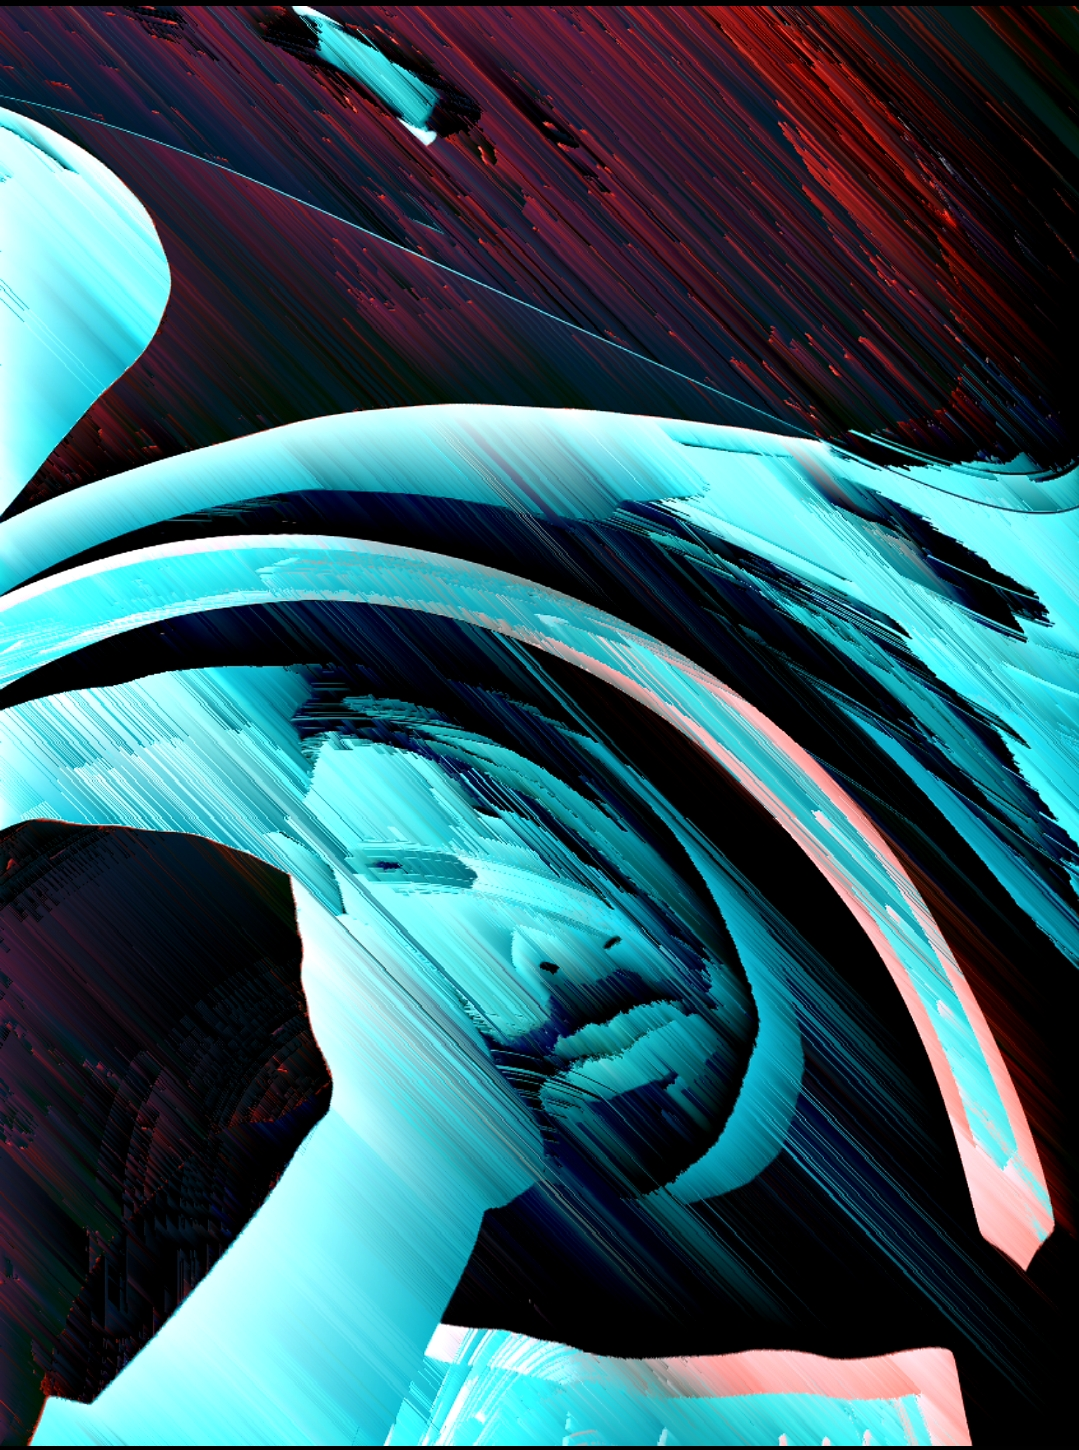 A blue and red-colored image of someone sitting with their head in their hand, deep in thought. They look upset. The image is stylized with pixelated lines, giving it an illusion of depth.